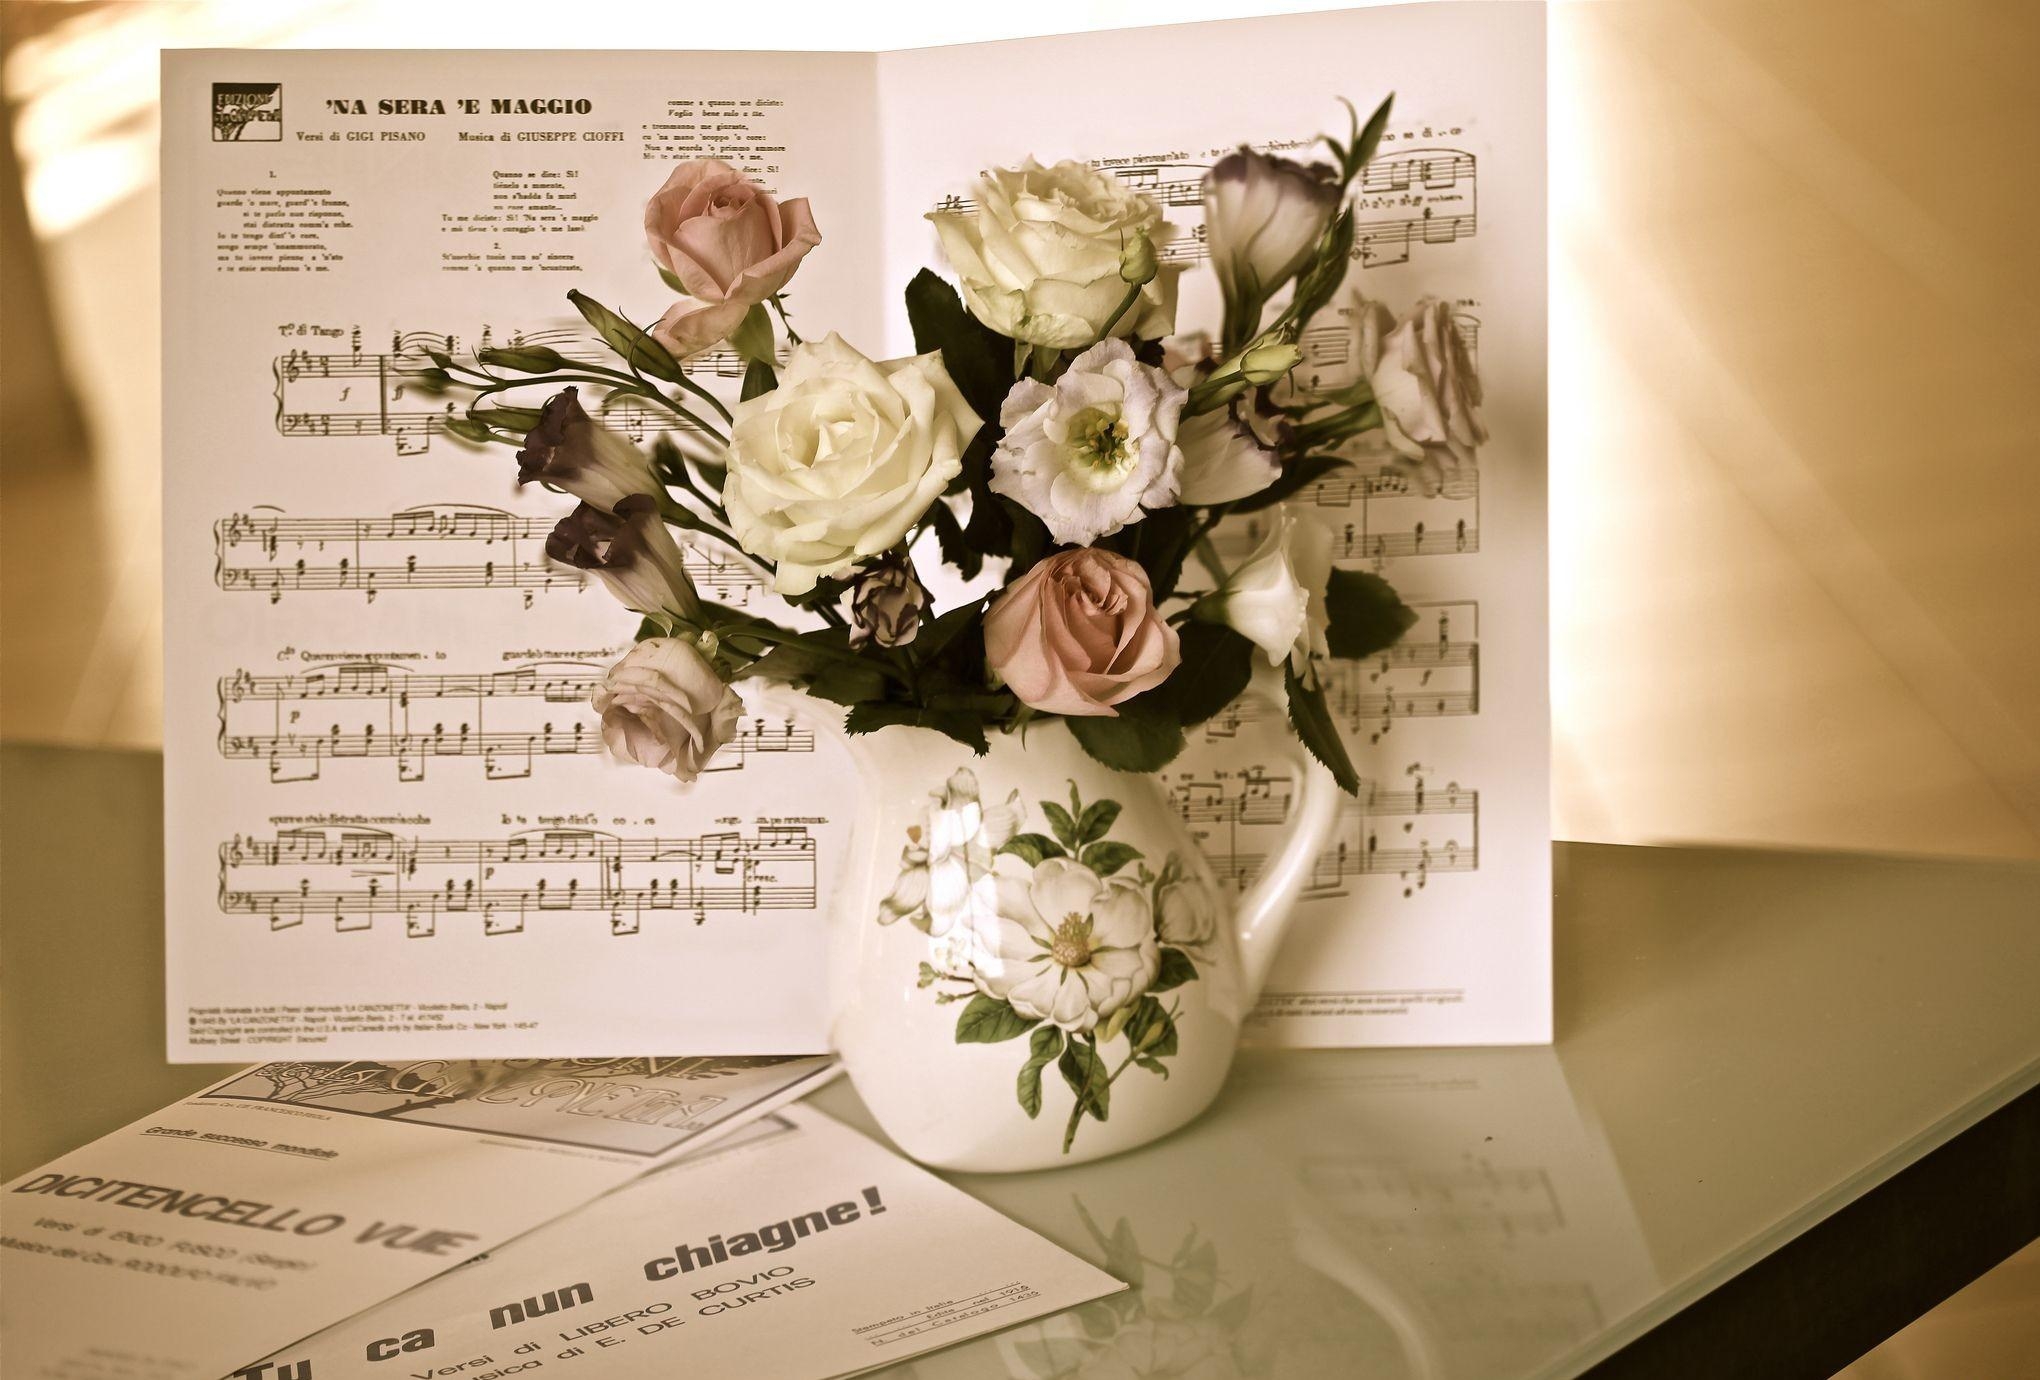 music, flowers, roses, bouquet, jug, table, notes